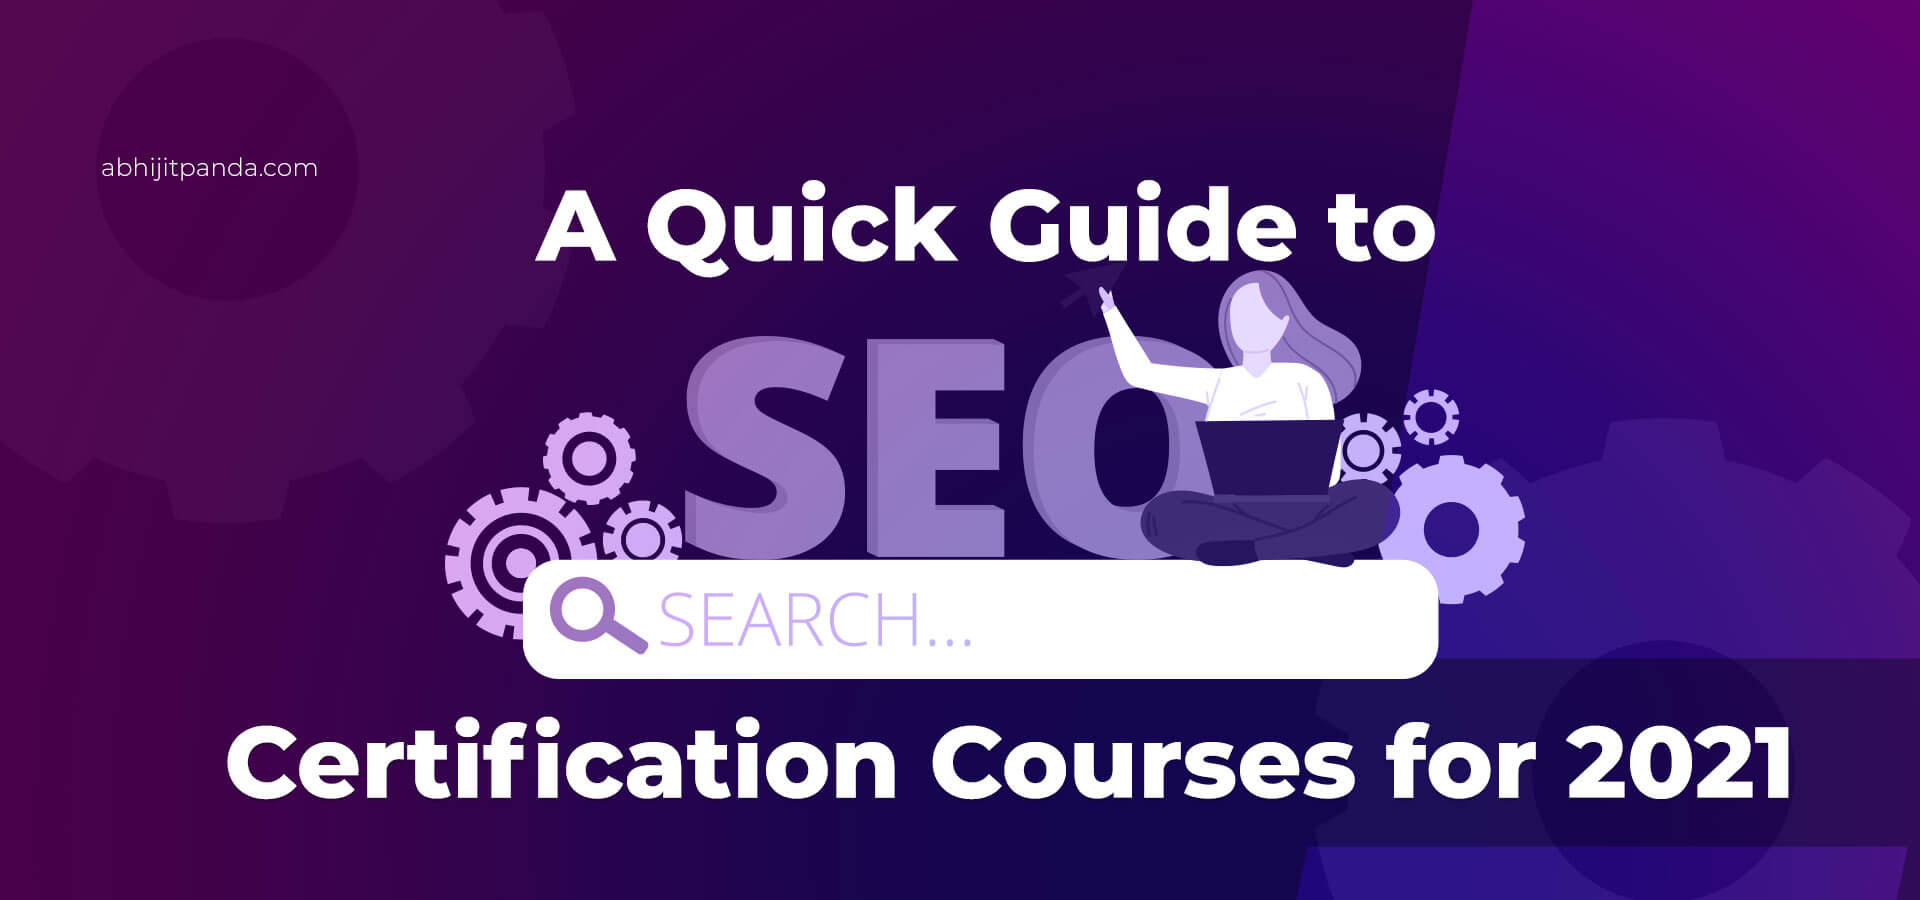 A Quick Guide to SEO Certification Courses